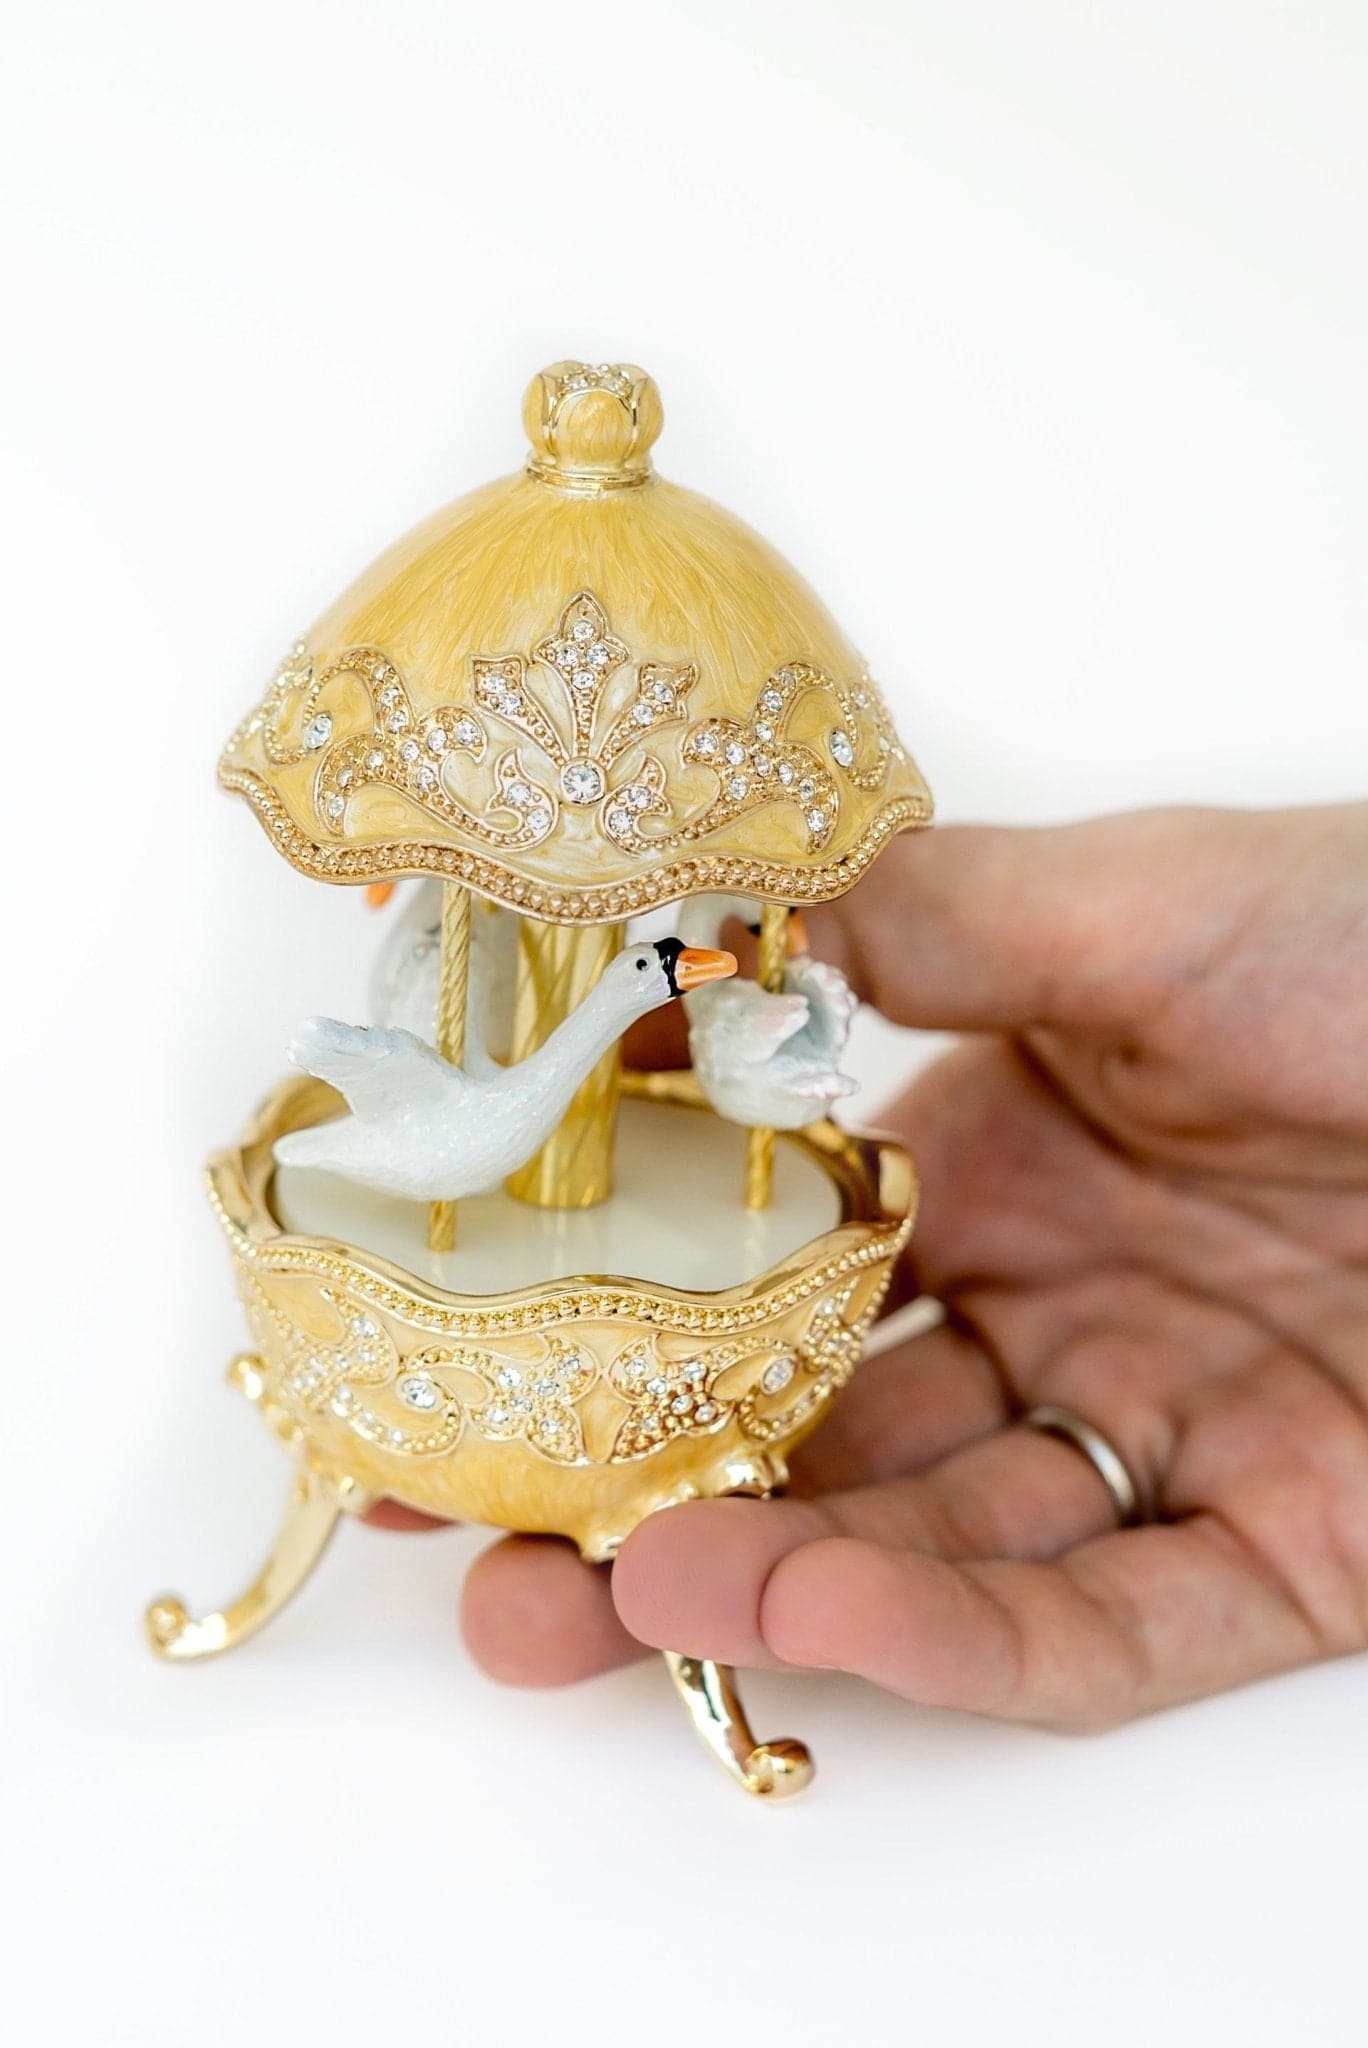 Yellow Carousel Egg with White Swans - Treasures of my HeART